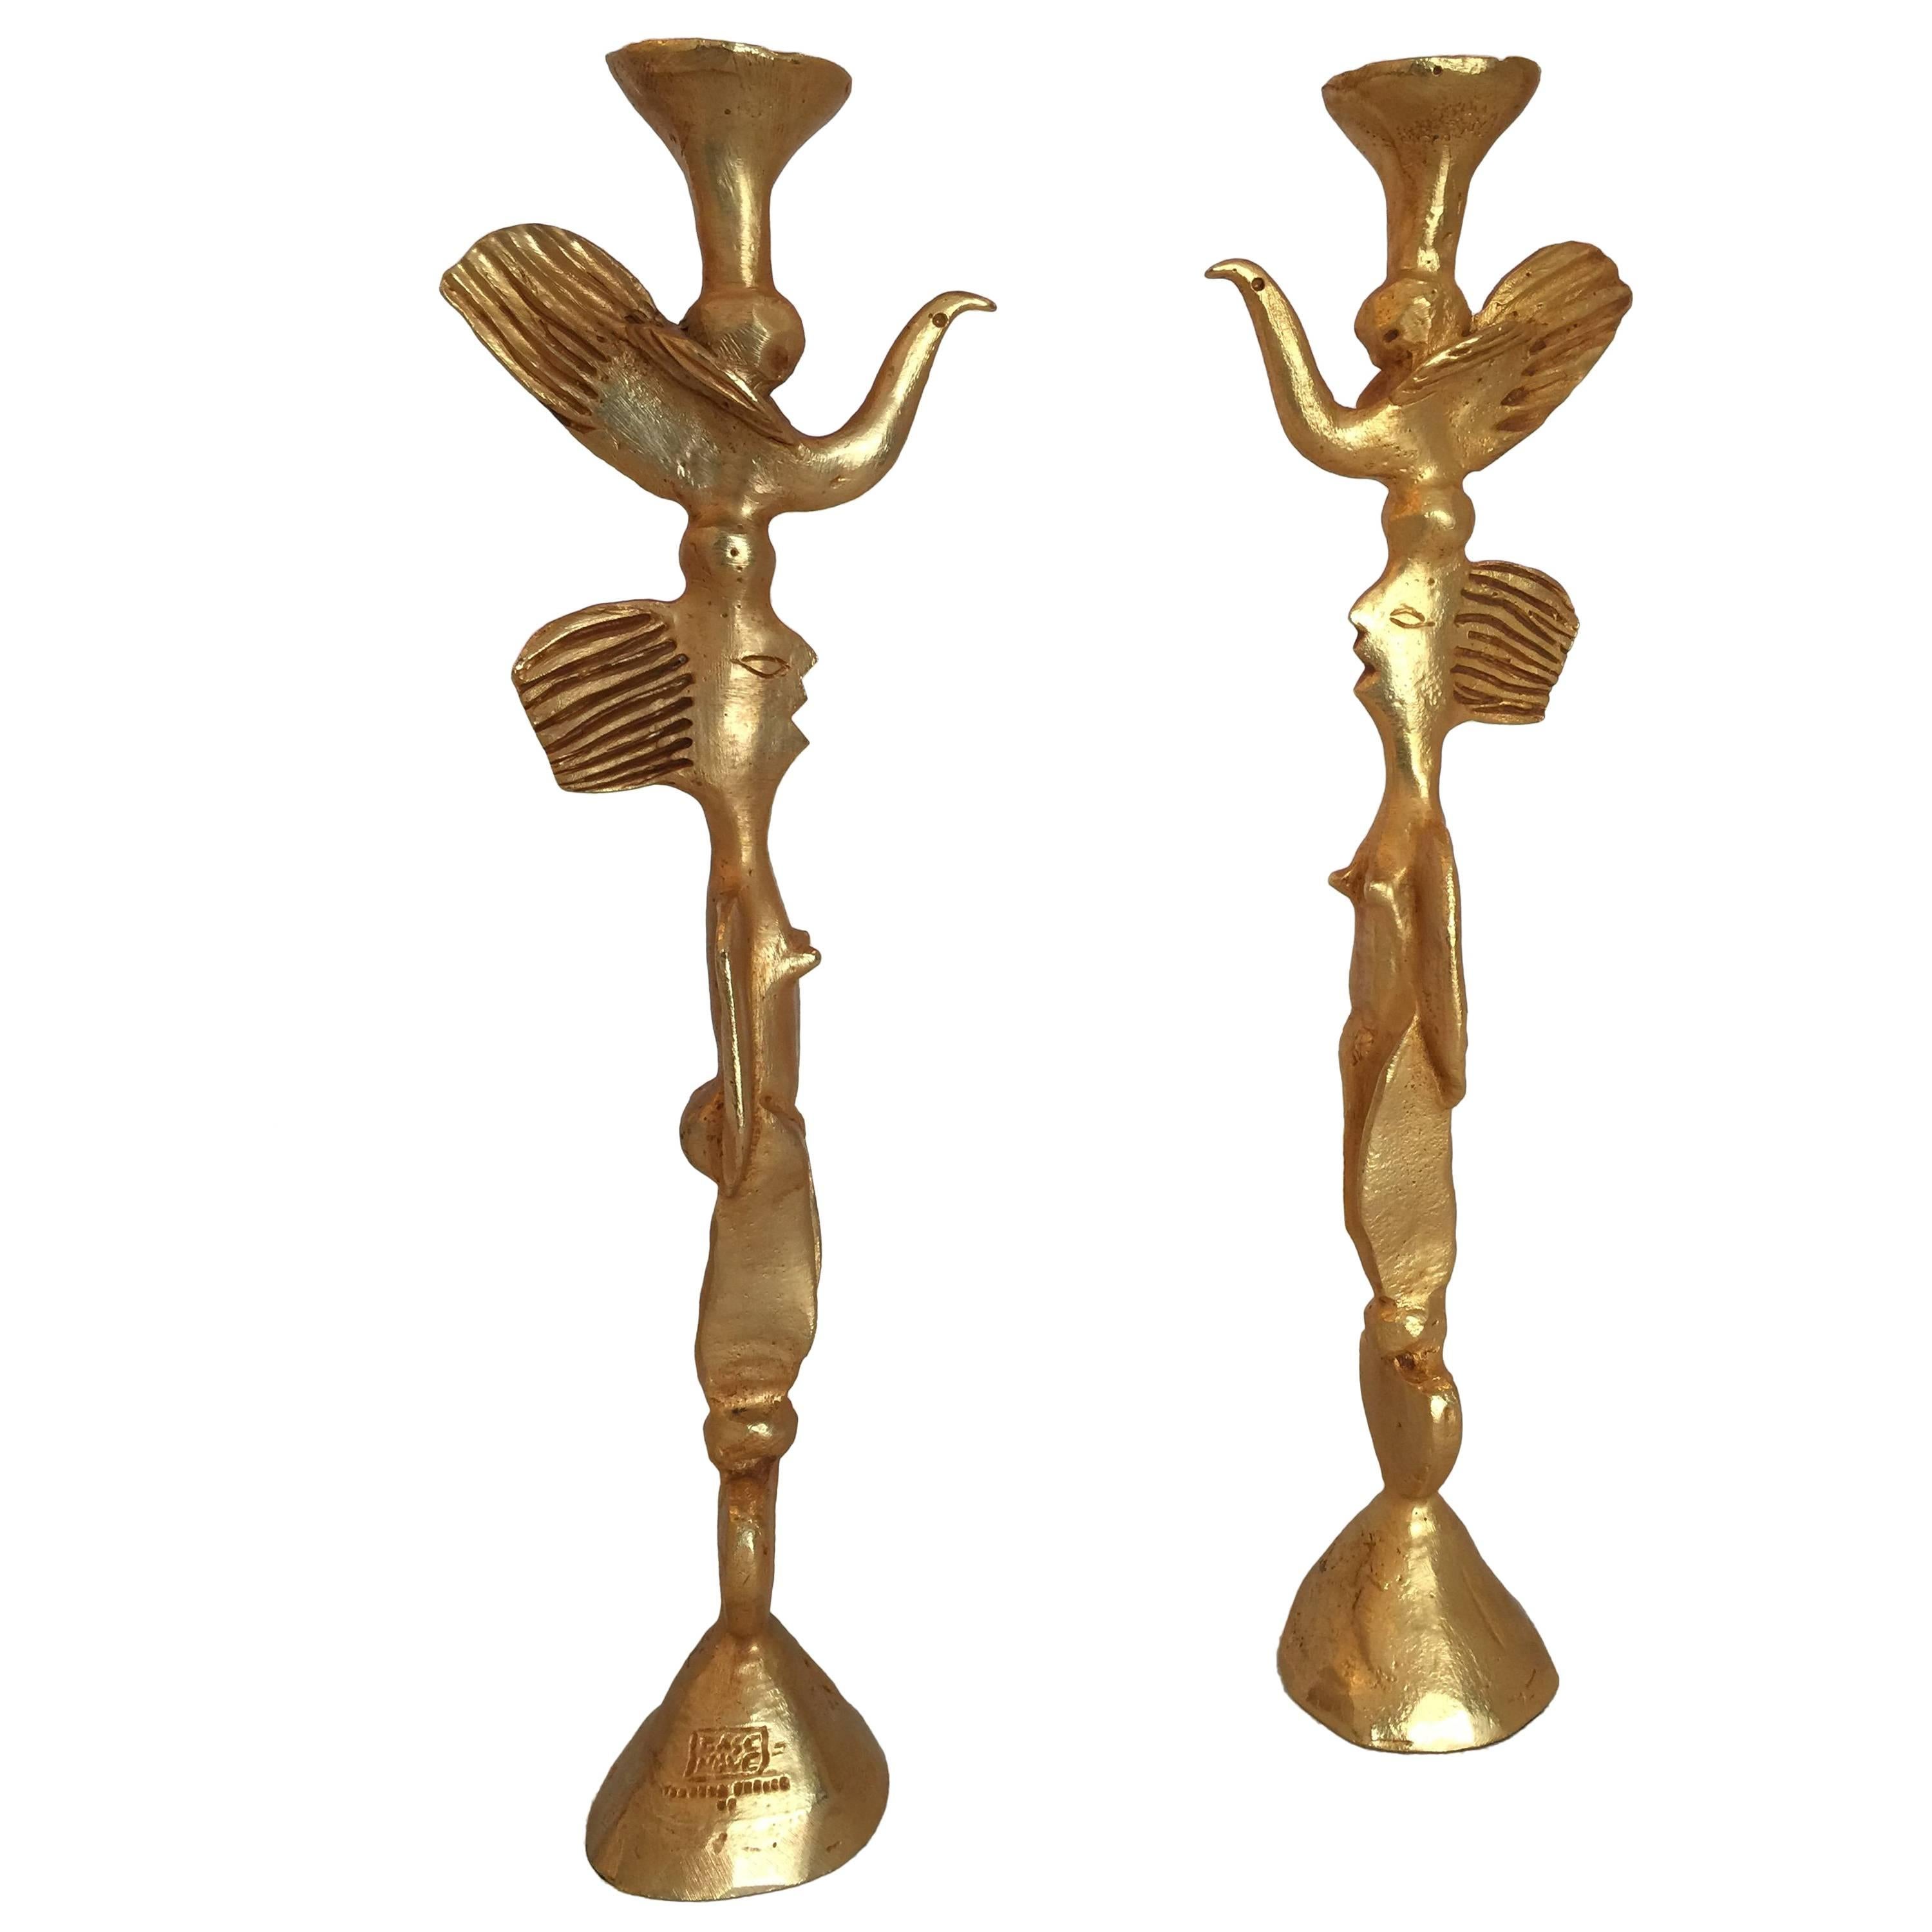 Pair of Gilt Bronze Candleholders by Pierre Casenove for Fondica